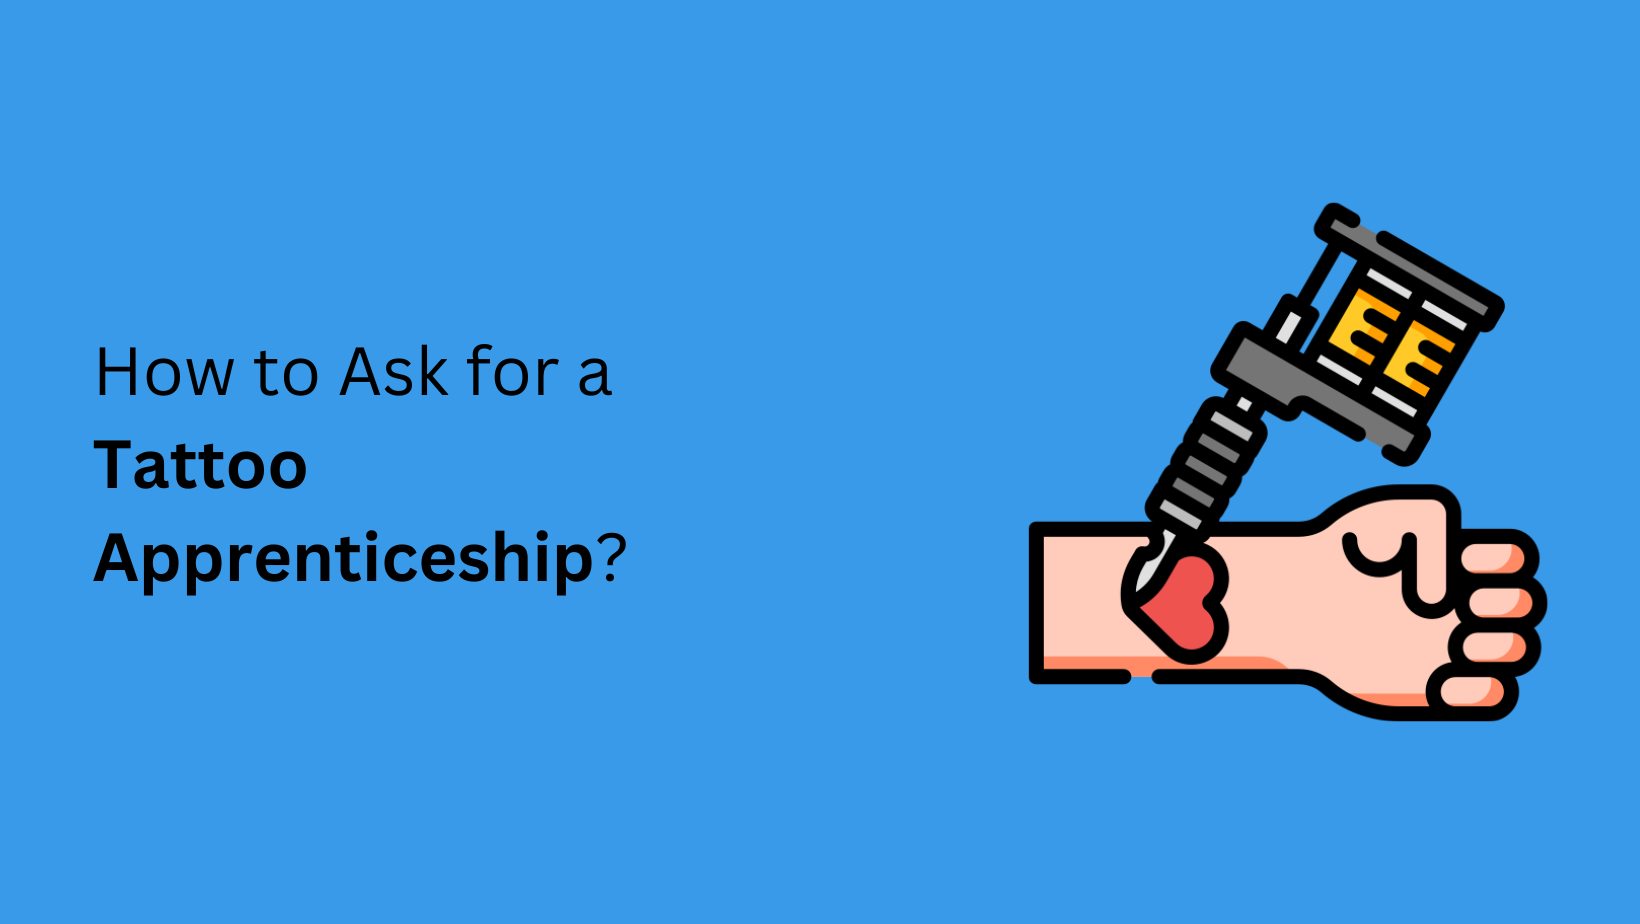 How to Ask for a Tattoo Apprenticeship